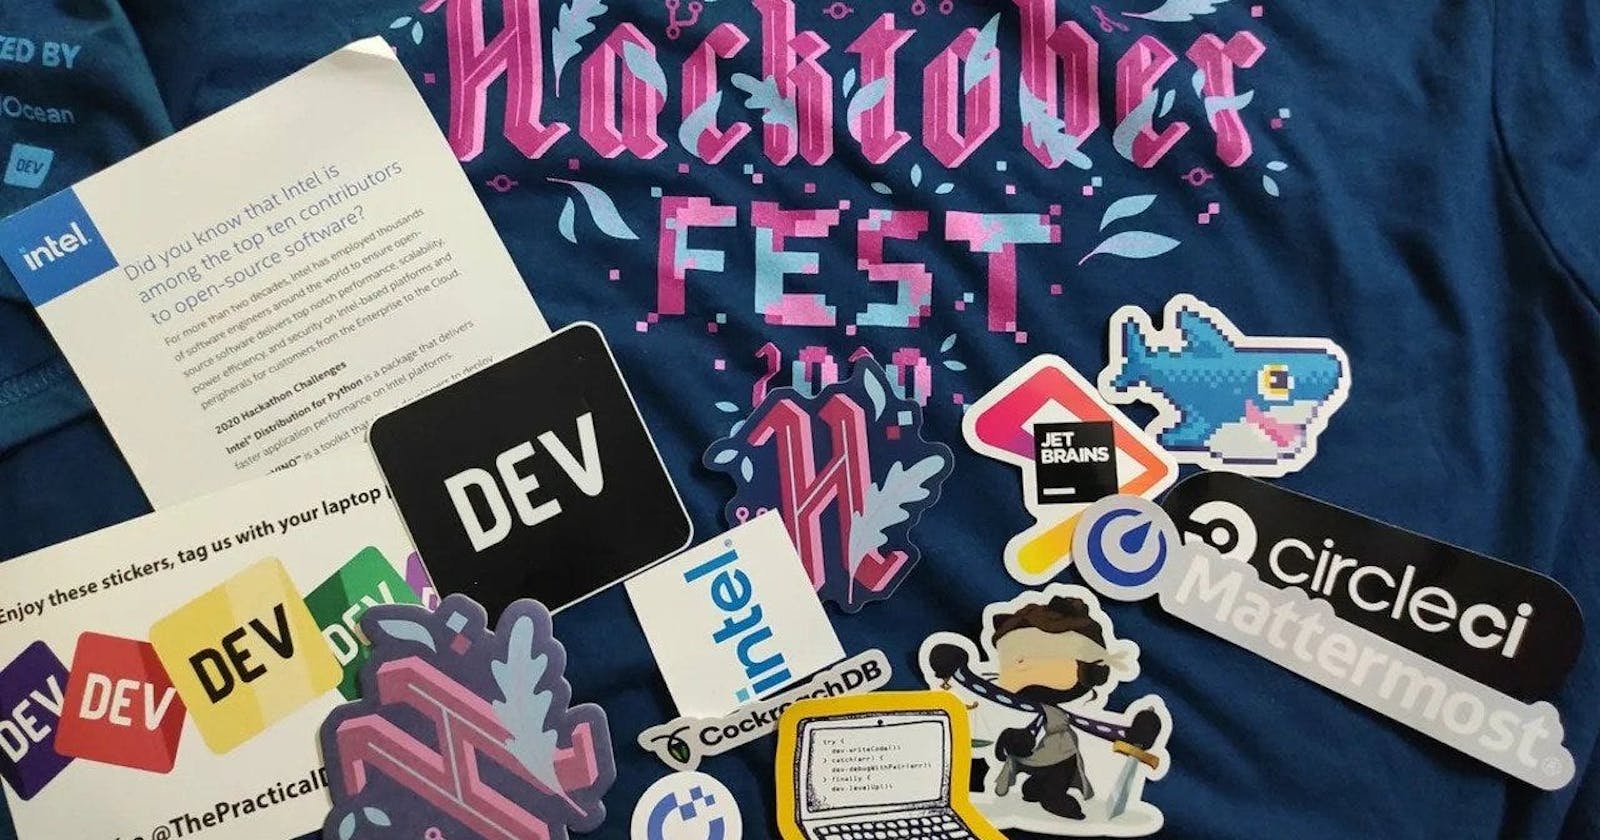 How to get started with Hacktoberfest as a Beginner